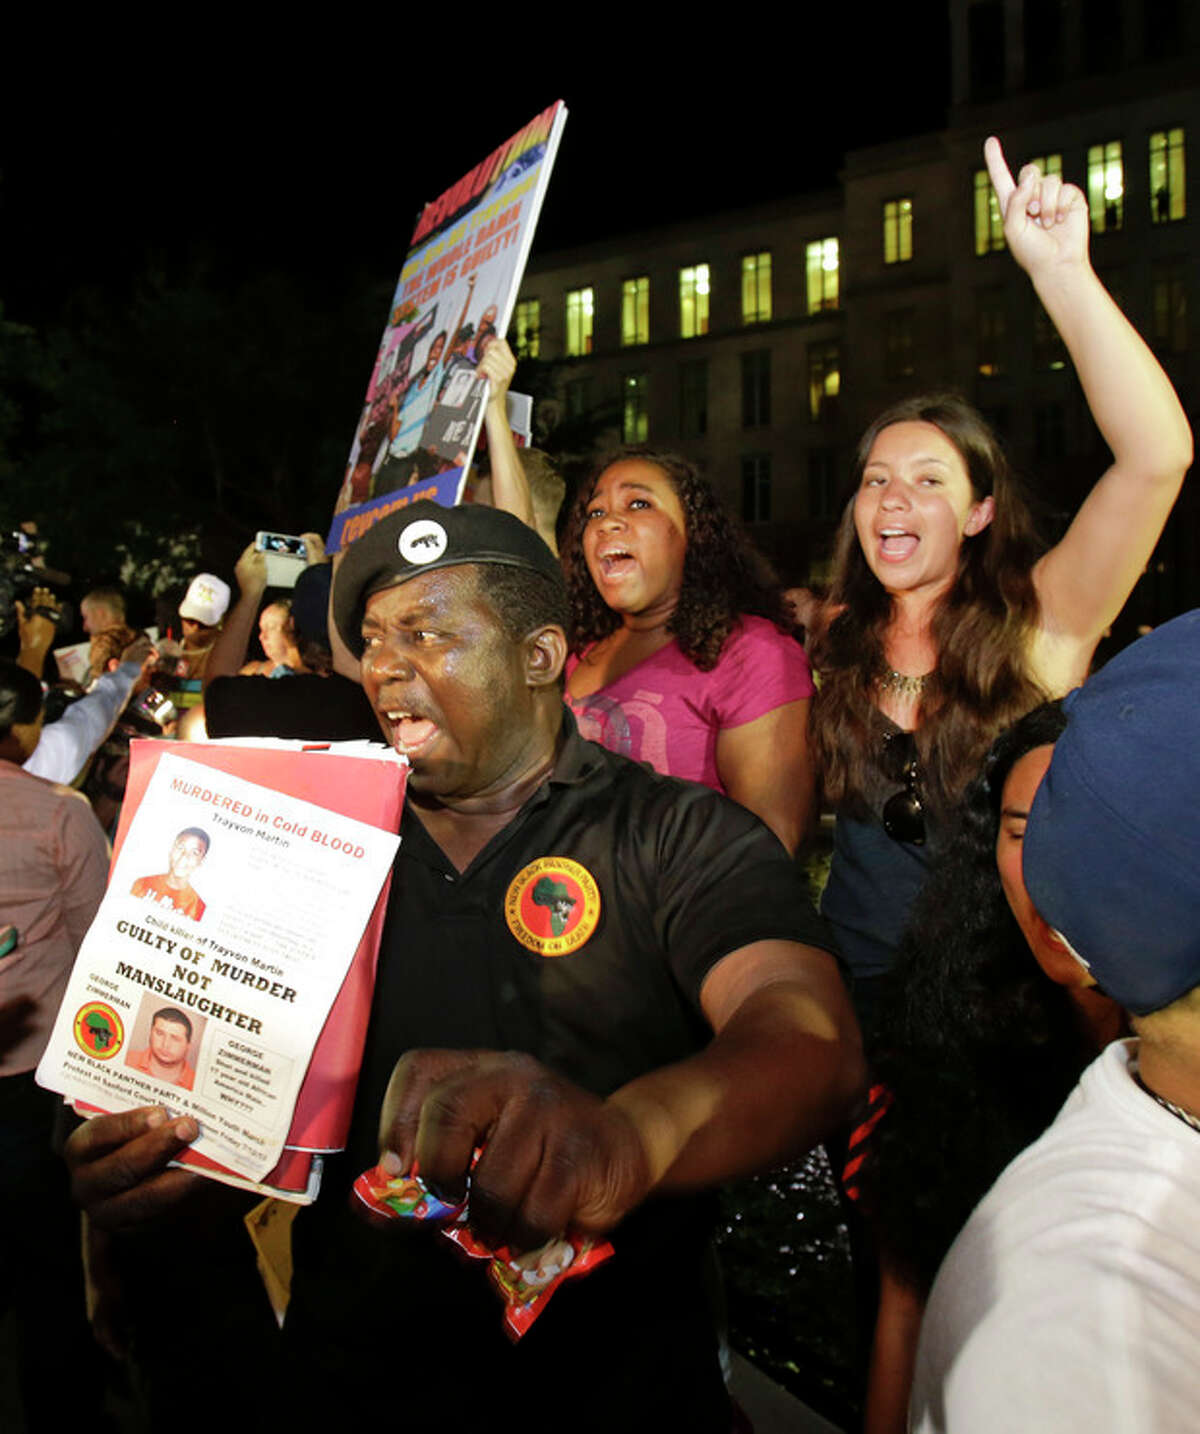 James Evan Muhammad, front left, of the New Black Panther Party, shouts slogans after the verdict of not guilty was handed down in the trial of George Zimmerman at the Seminole County Courthouse, Saturday, July 13, 2013, in Sanford, Fla. Neighborhood watch captain George Zimmerman was cleared of all charges Saturday in the shooting of Trayvon Martin, the unarmed black teenager whose killing unleashed furious debate across the U.S. over racial profiling, self-defense and equal justice. (AP Photo/John Raoux)